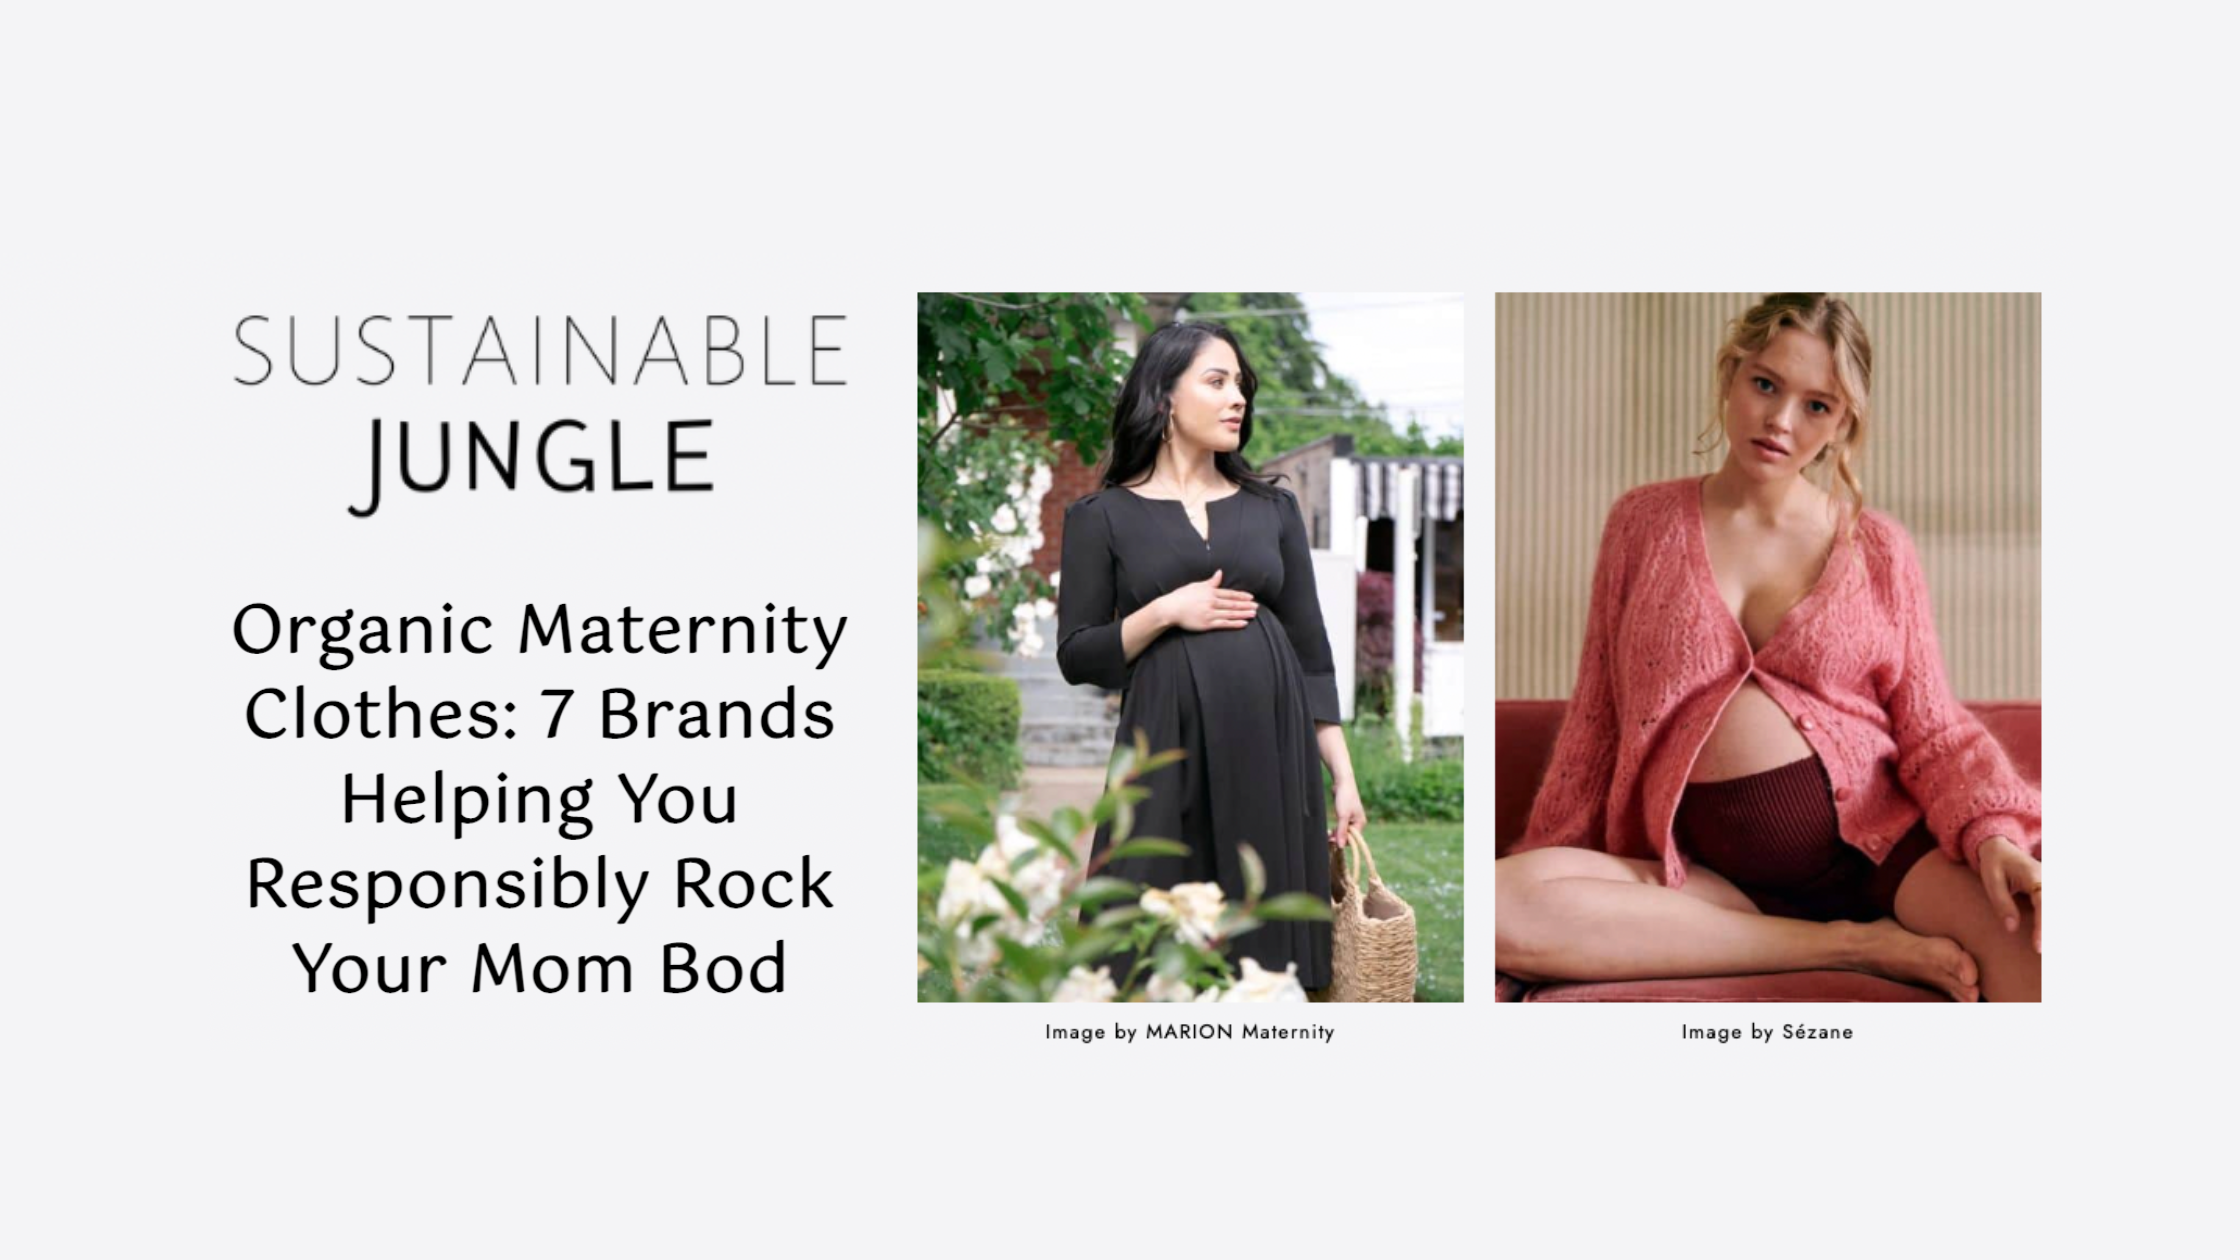 MARION in the News: Sustainable Jungle's 7 Best Maternity Brands